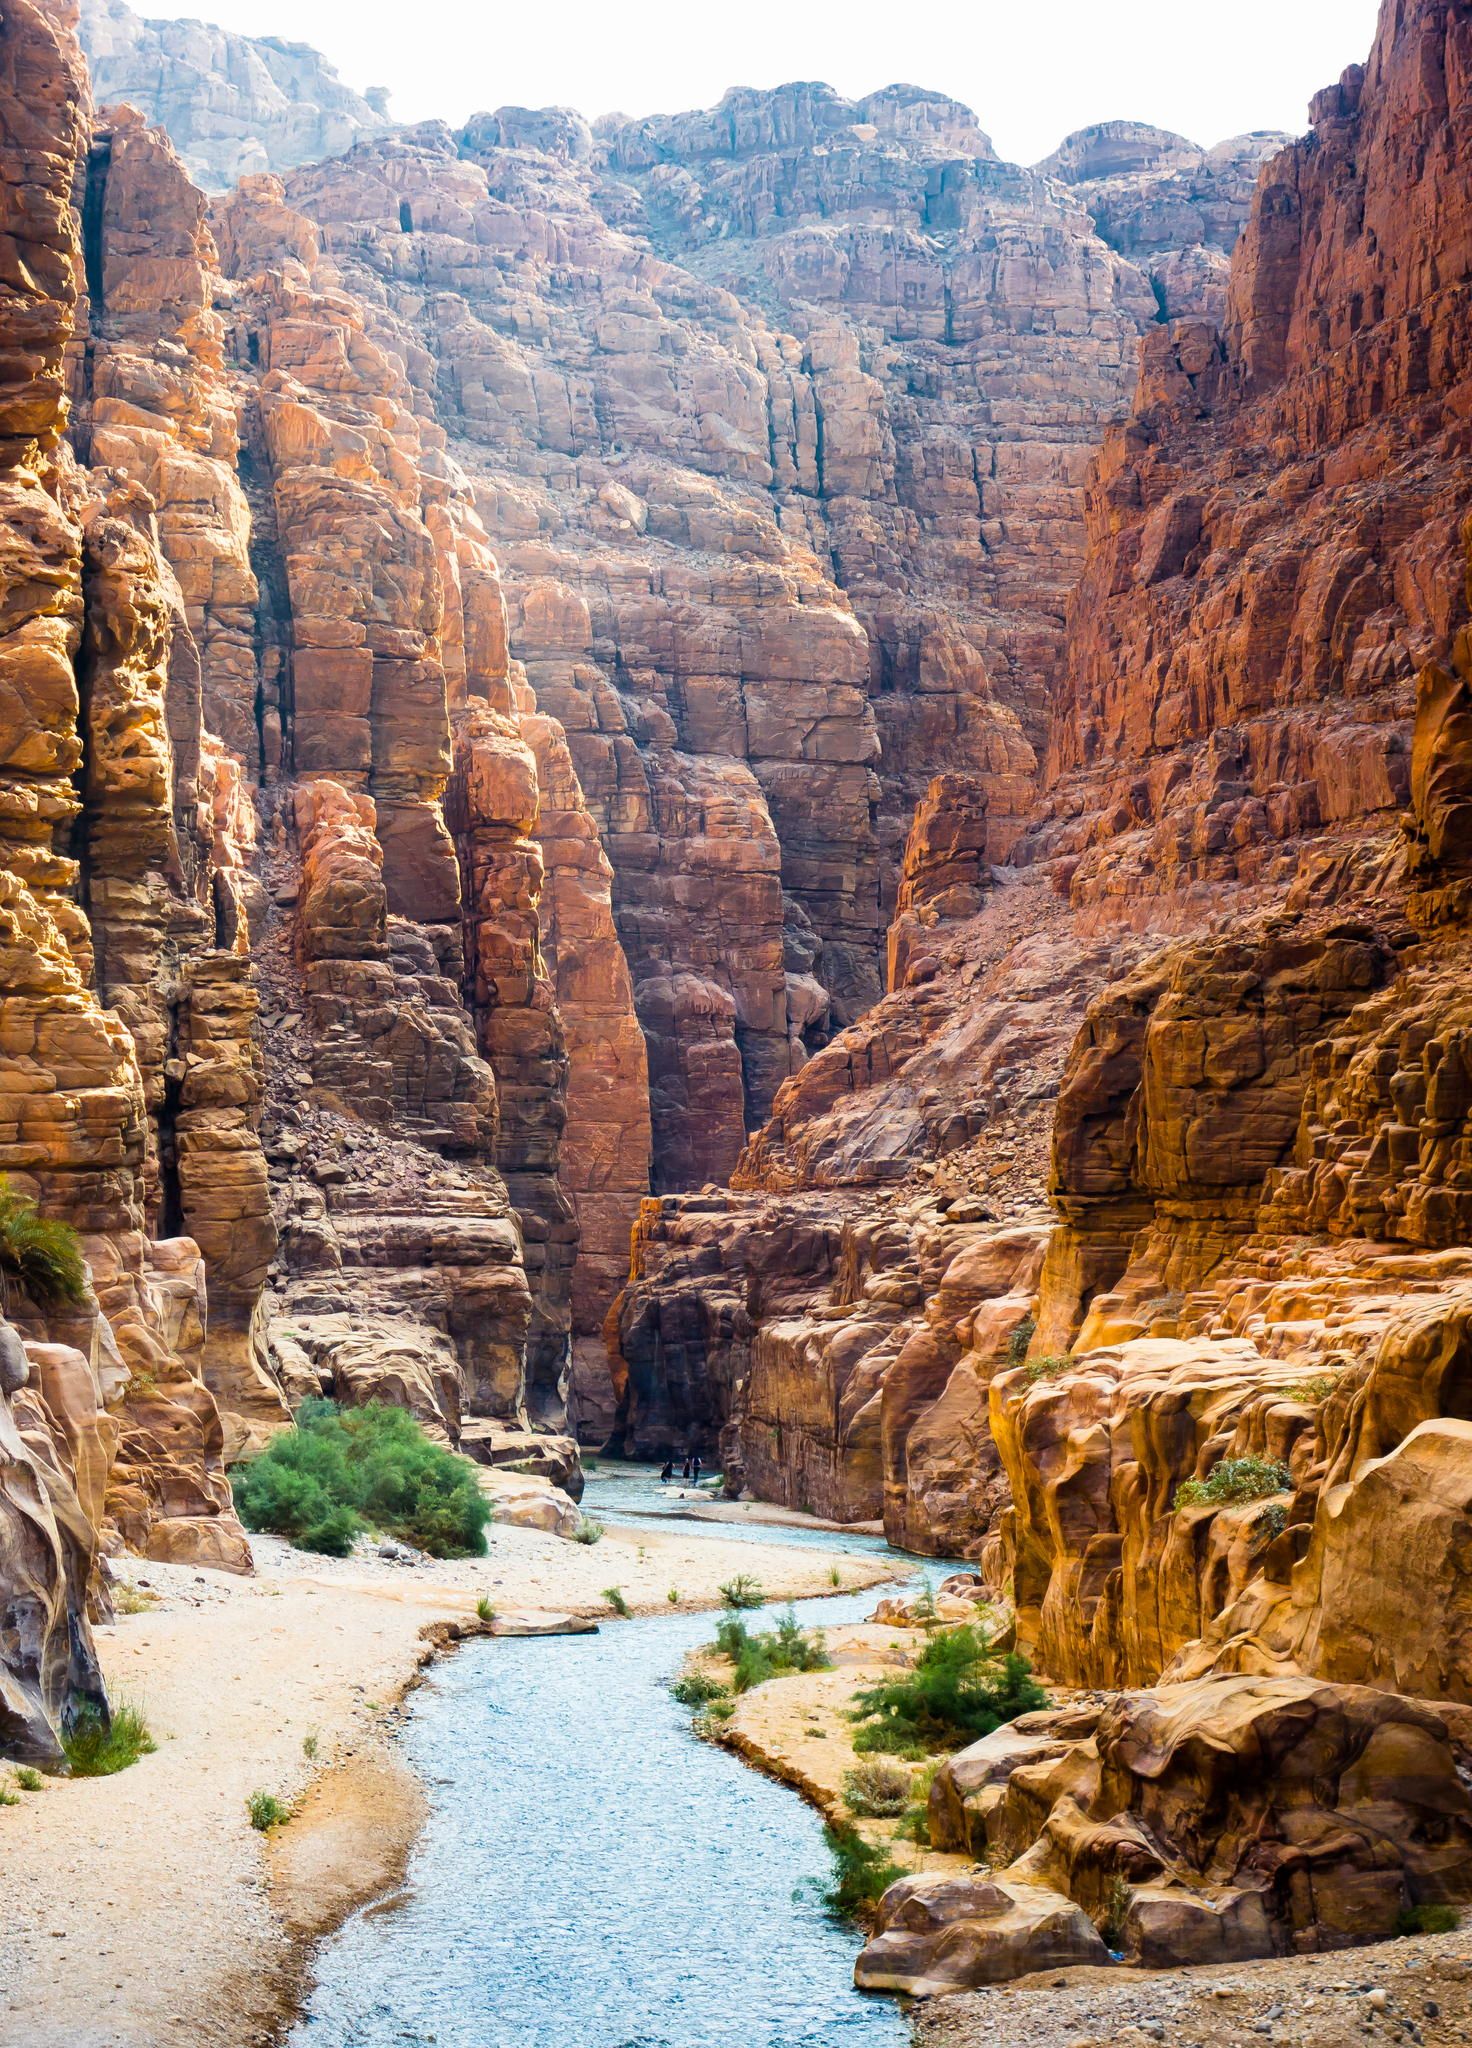 of Jordan US on Twitter: "The Mujib Nature Reserve, spanning 220 square kilometers, is considered the lowest nature reserve in the world. The reserve enjoys tremendous biodiversity, of 300 species